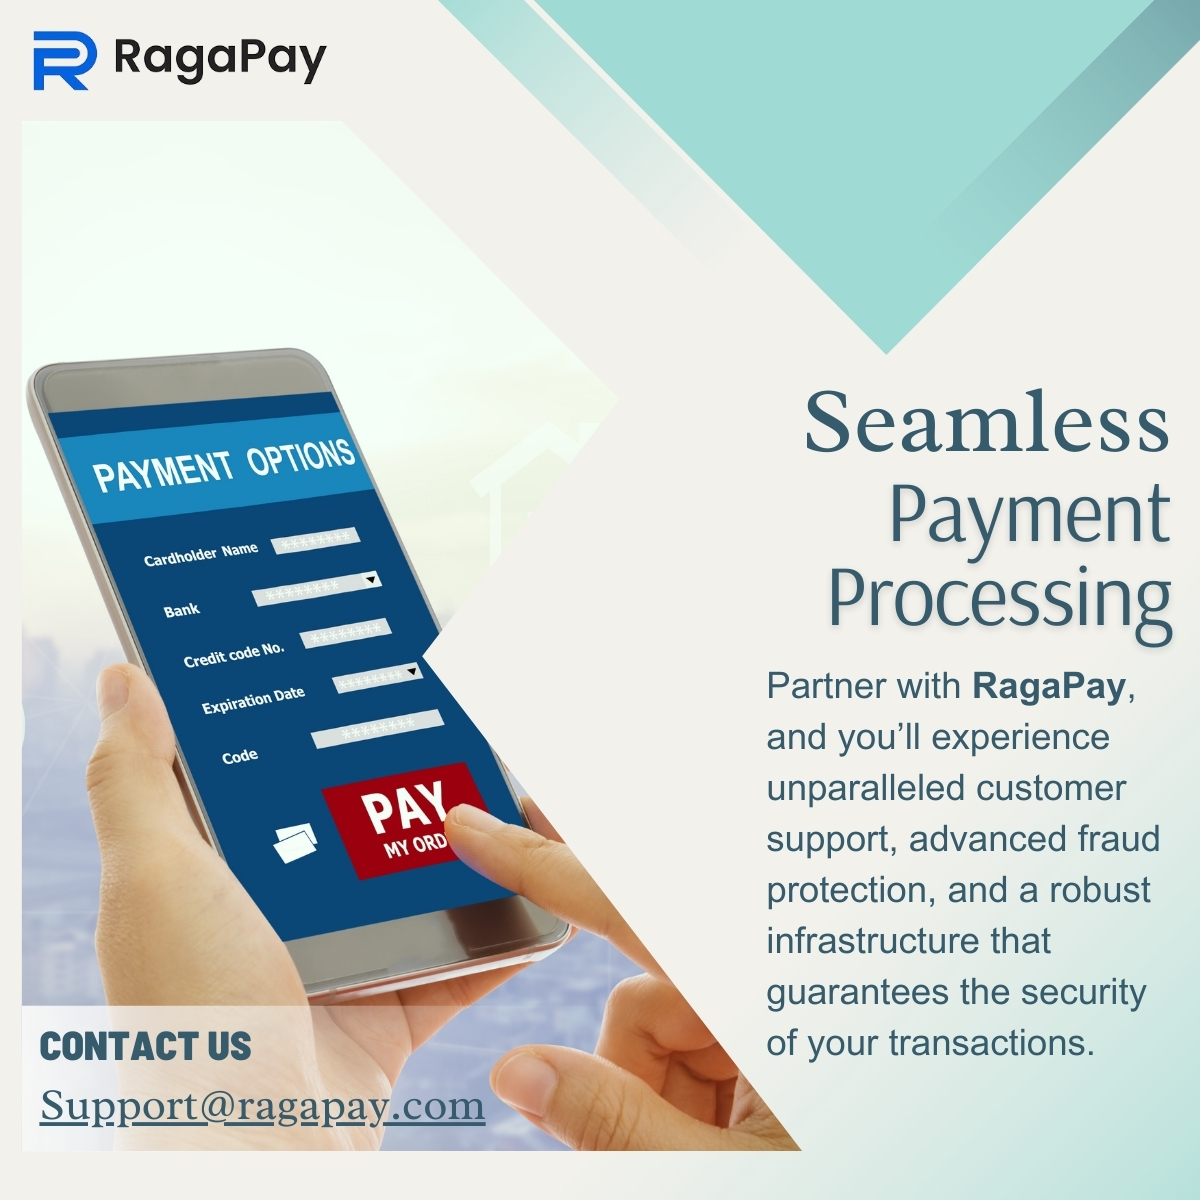 Seamless Payment Processing: Partner with RagaPay, and experience unparalleled customer support, advanced fraud protection, and a robust infrastructure guaranteeing the security of your transactions. 💳🔒 

#PaymentProcessing #RagaPay #CustomerSupport #FraudProtection